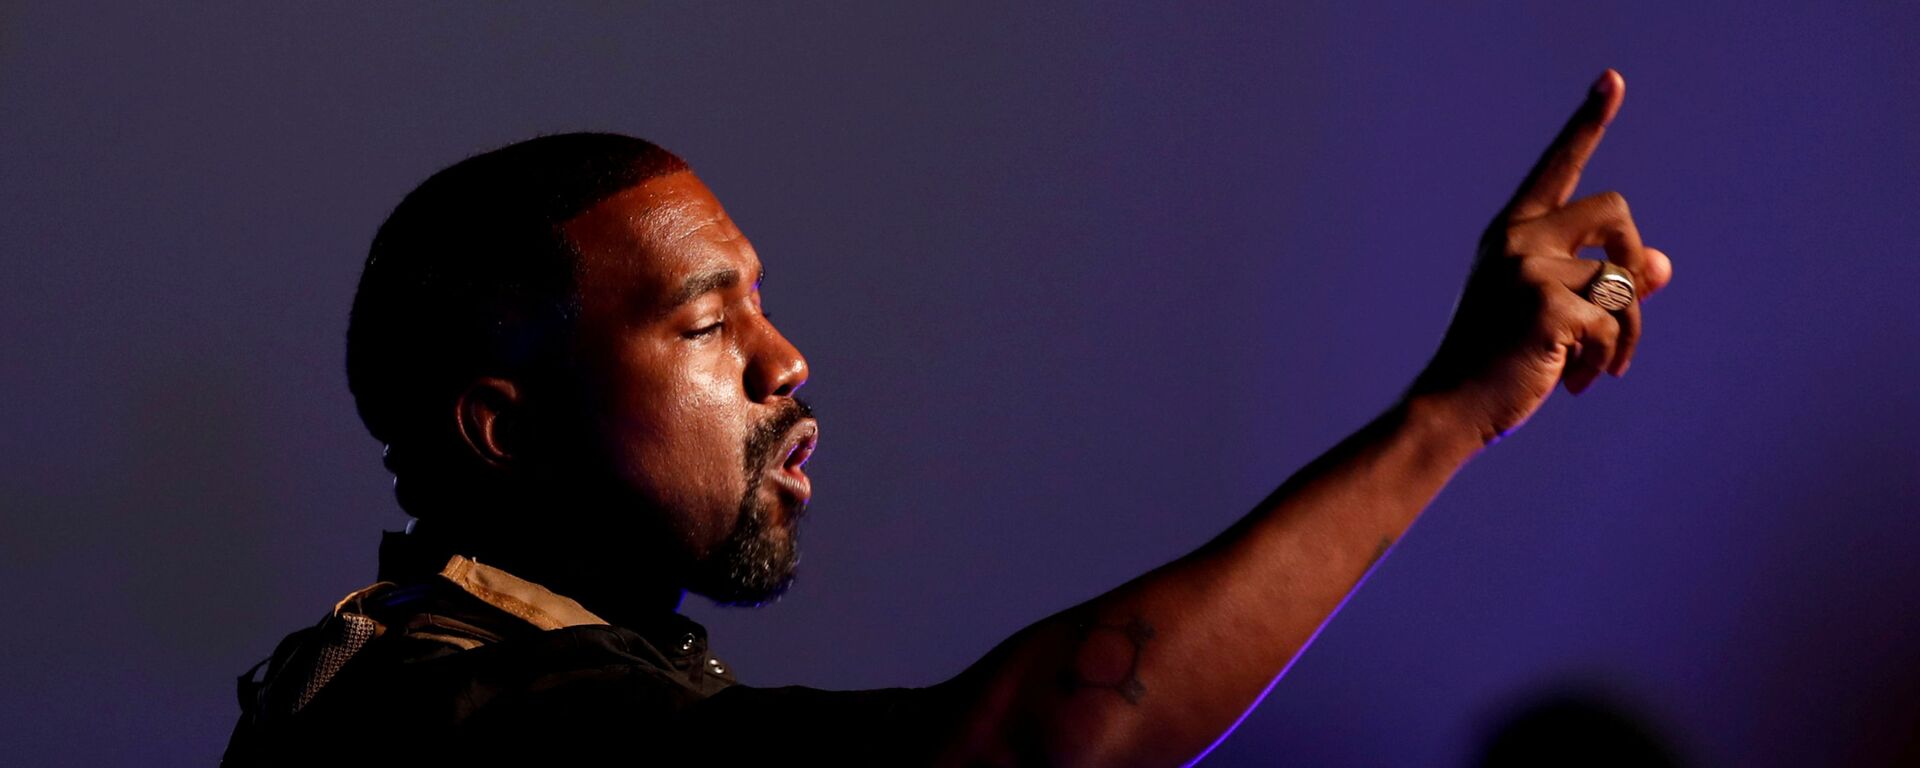  Rapper Kanye West makes a point as he holds his first rally in support of his presidential bid in North Charleston, South Carolina, U.S. July 19, 2020 - Sputnik International, 1920, 01.09.2020